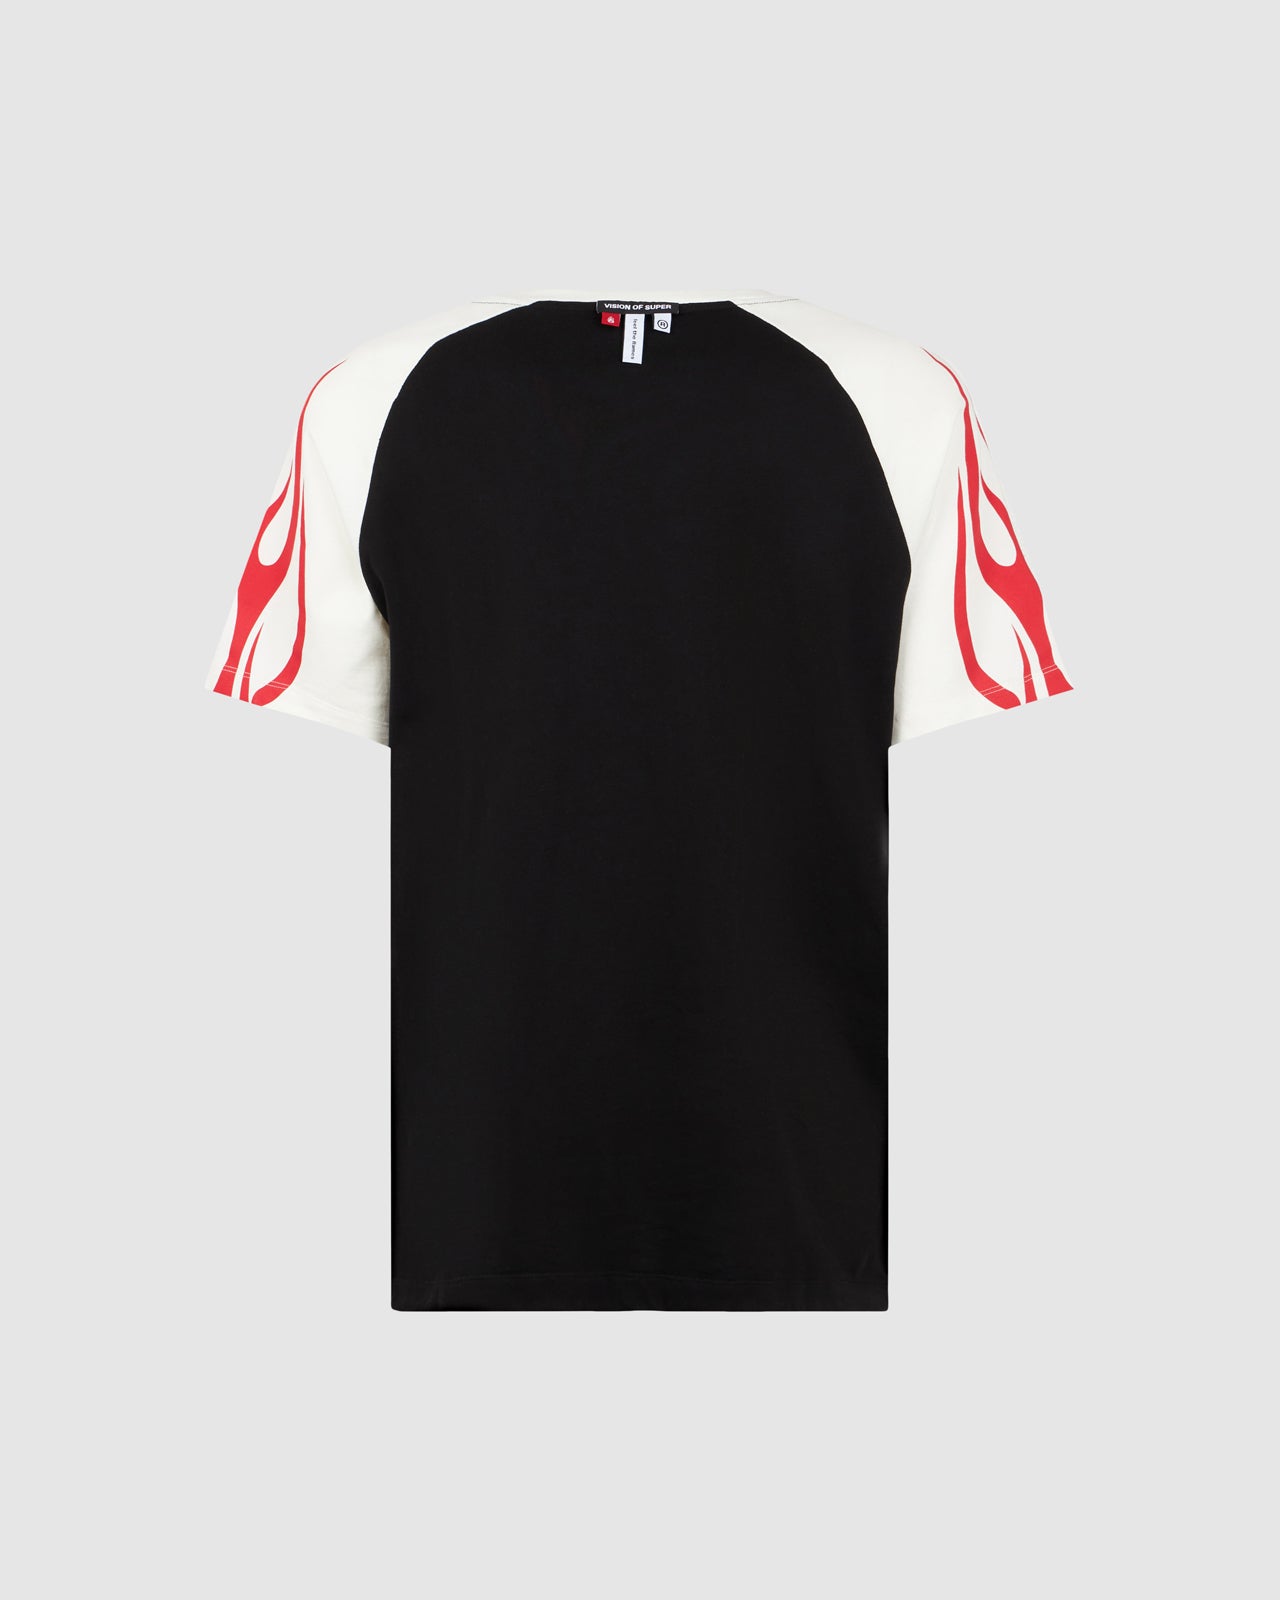 VISION OF SUPER WHITE & BLACK T-SHIRT WITH RED TRIBAL FLAMES